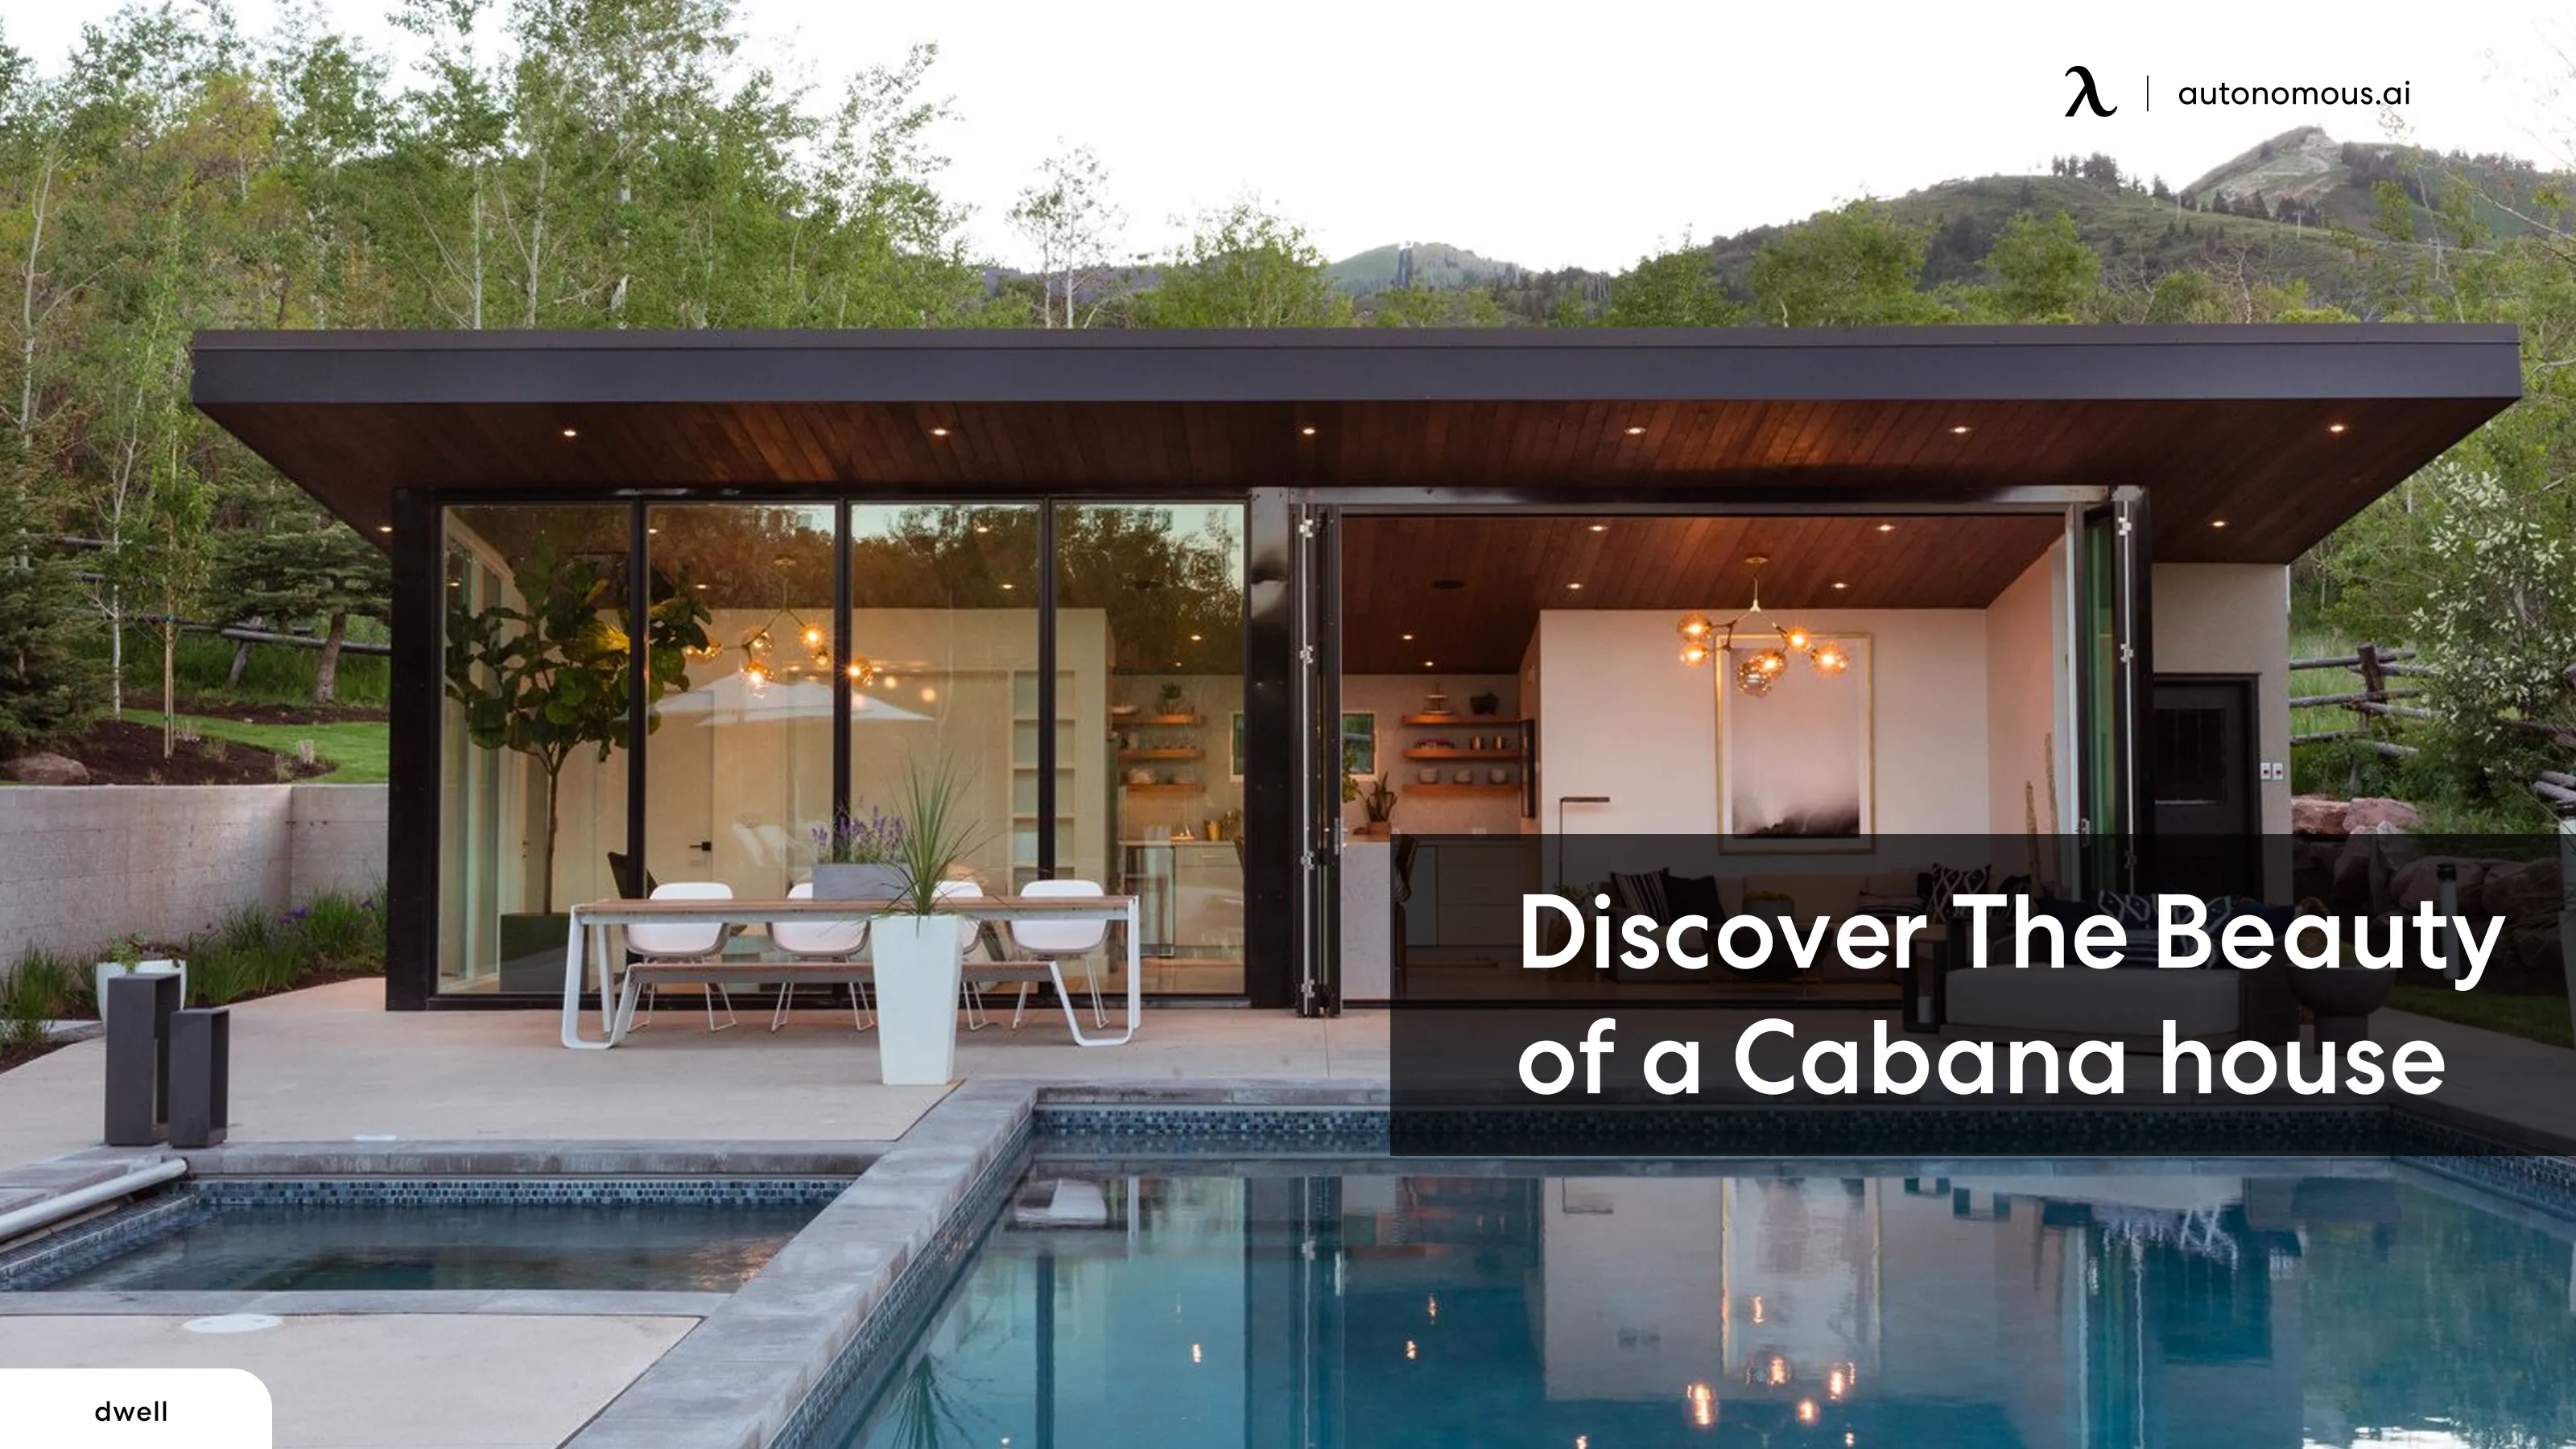 Relax and Unwind in Style: Discover The Beauty of a Cabana house